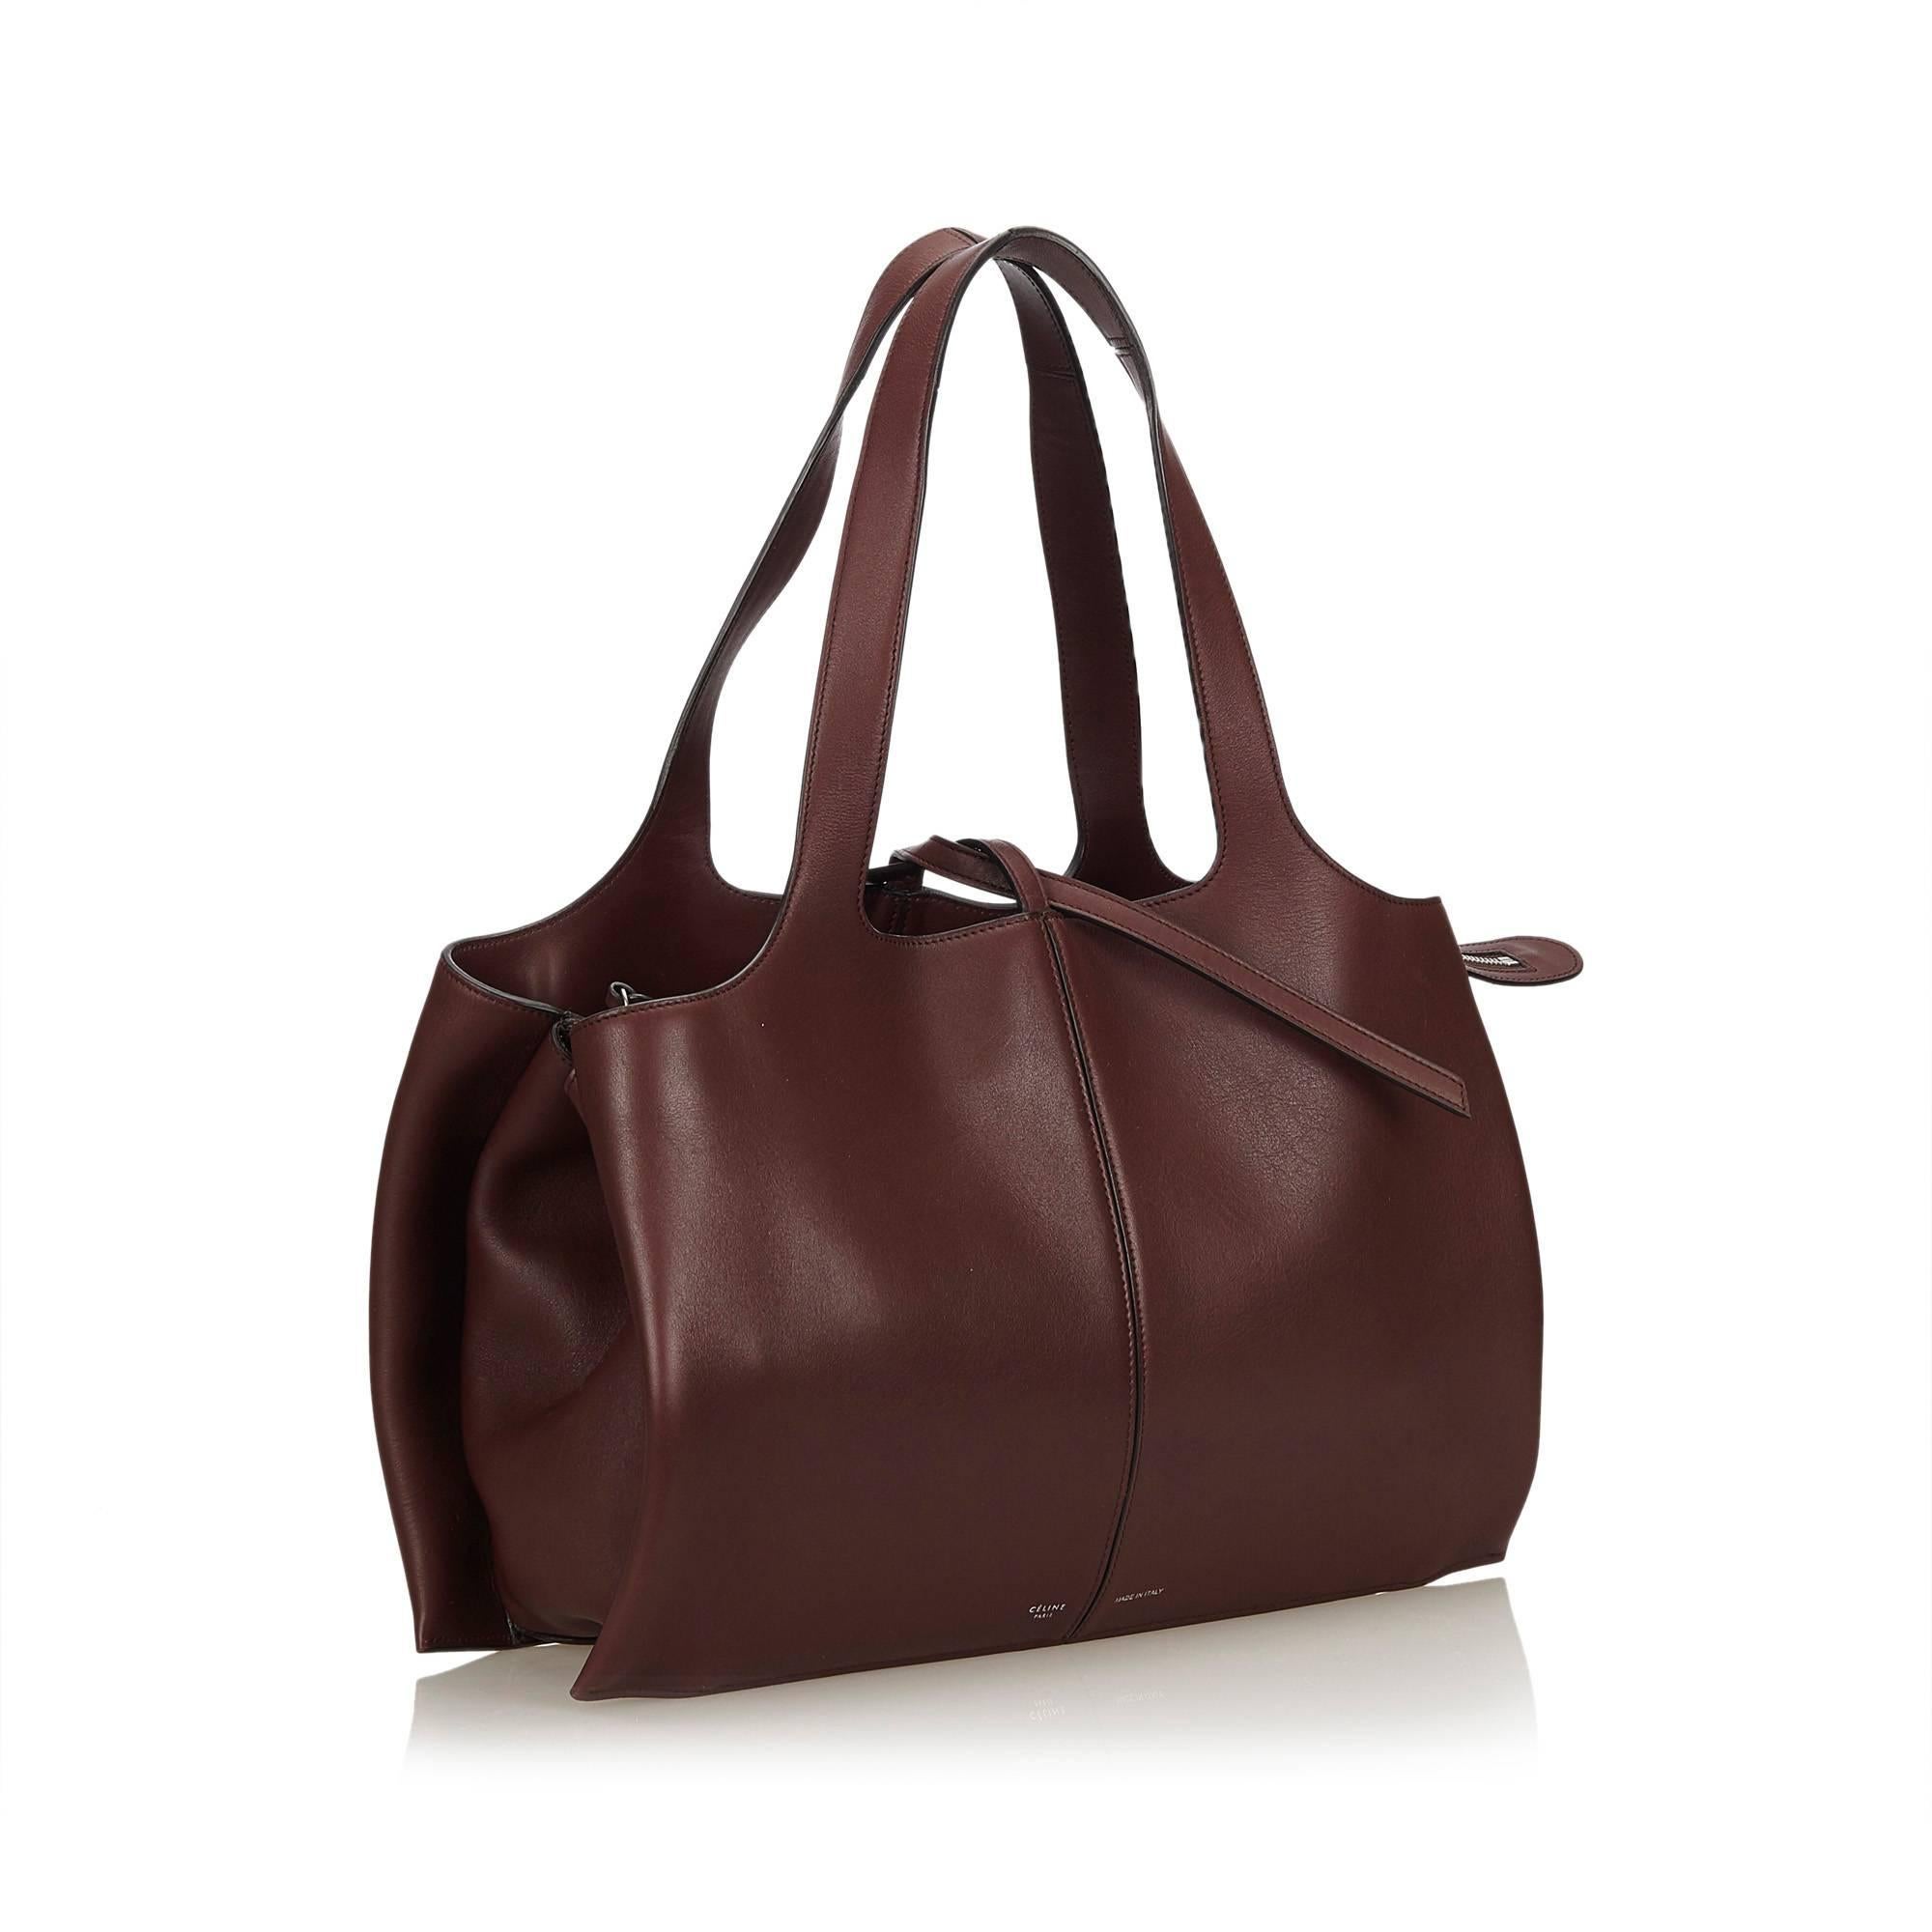 The Medium Trifold shoulder bag features a calf leather body, flat straps, triple compartments with top zip closure and interior slip pockets. 

It carries an A condition rating.

Dimensions: 
Length 47 cm
Width 25 cm
Depth 13 cm
Shoulder Drop 20